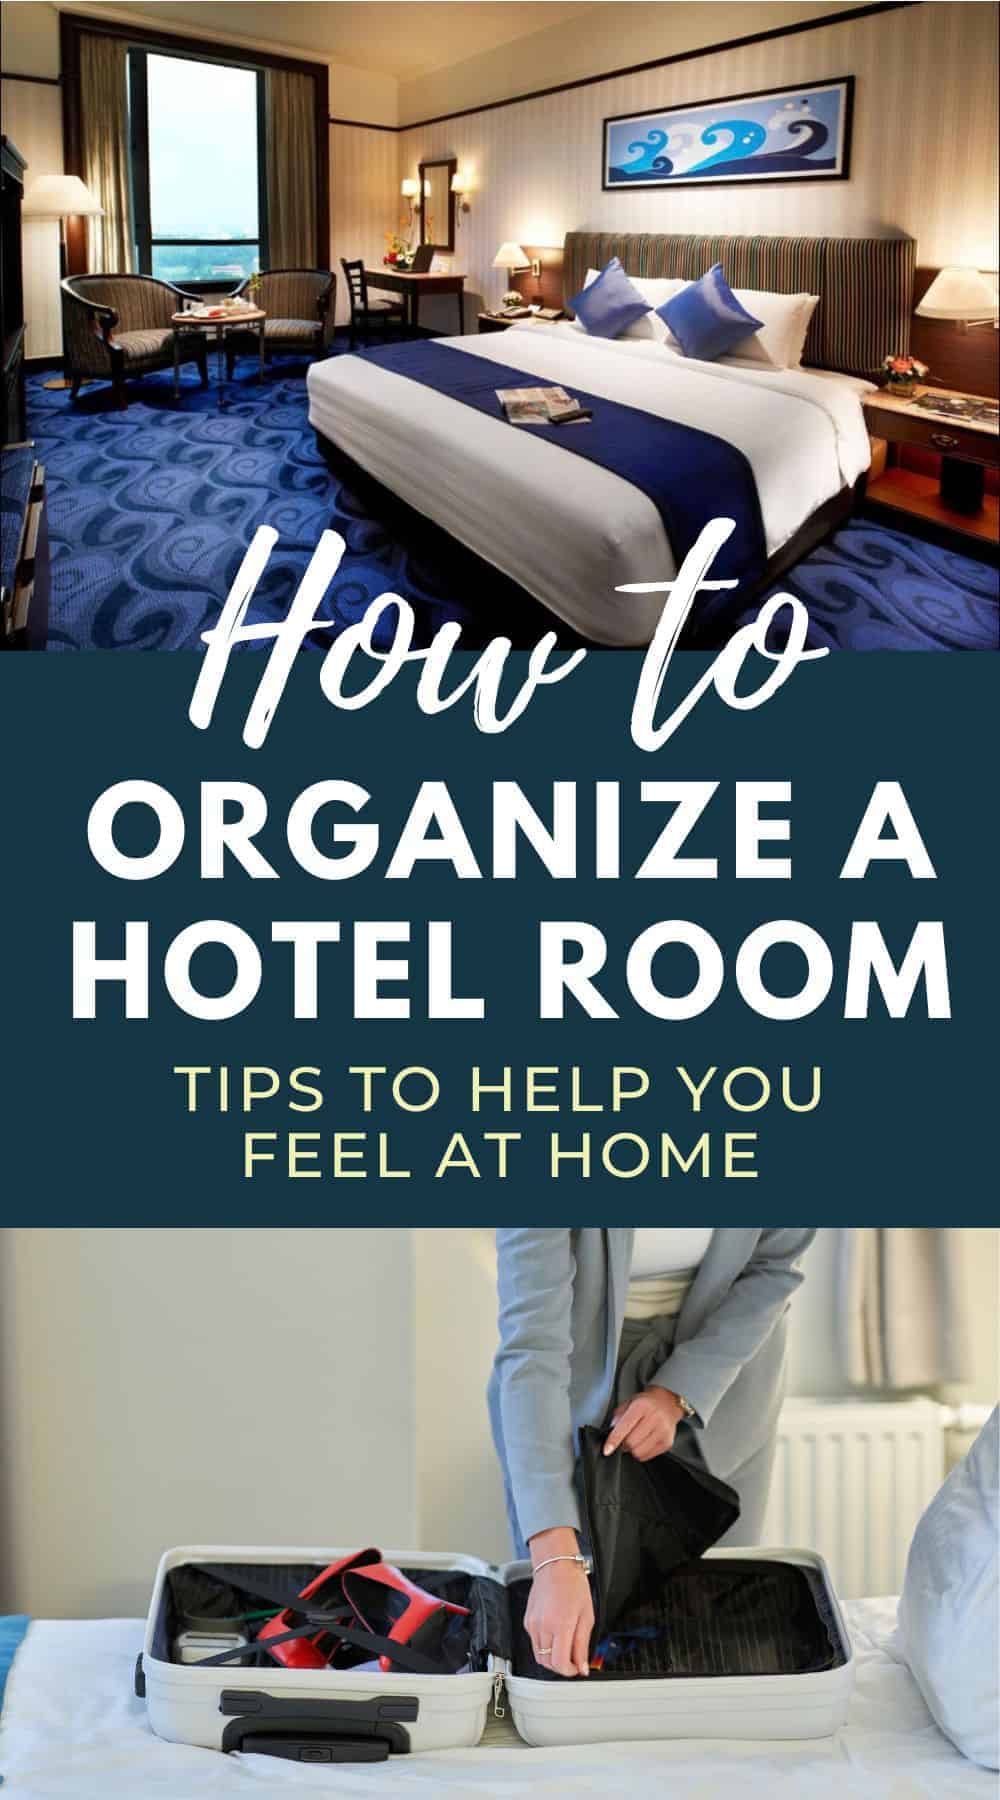 Pinterest image with two photos, one of a tidy hotel room and the other showing someone packing a small suitcase. The pin text says, "how to organize a hotel room, tips to help you feel at home."